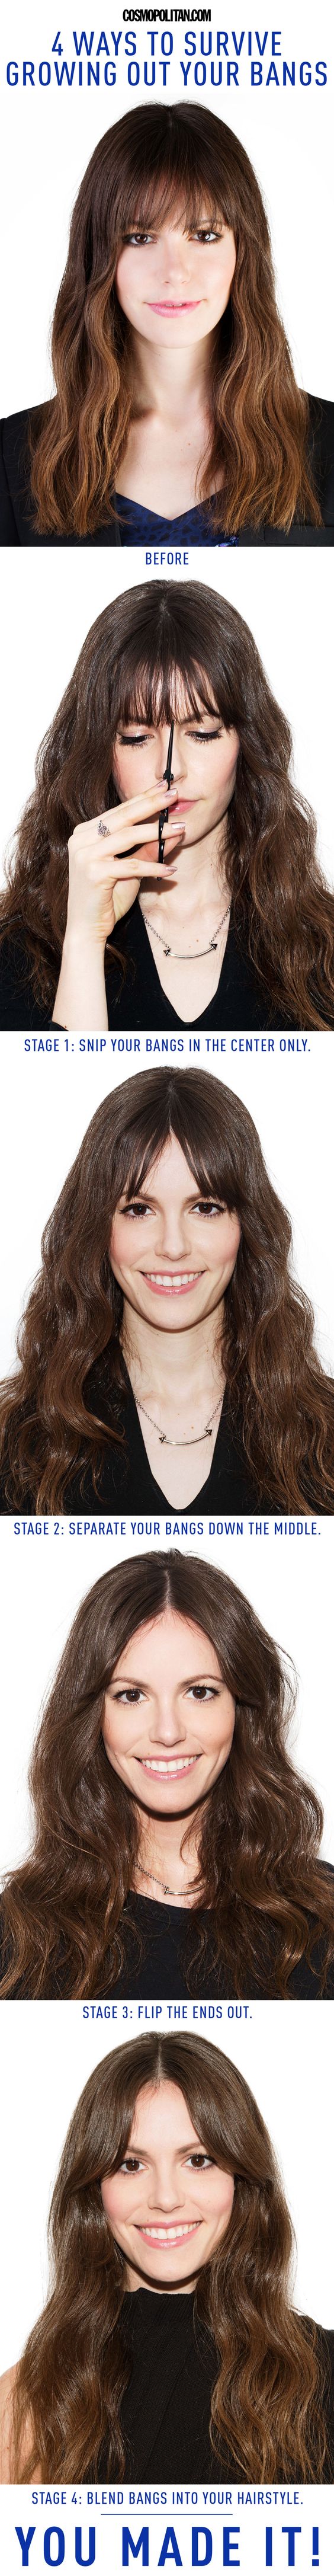 how-to-style-your-bangs via